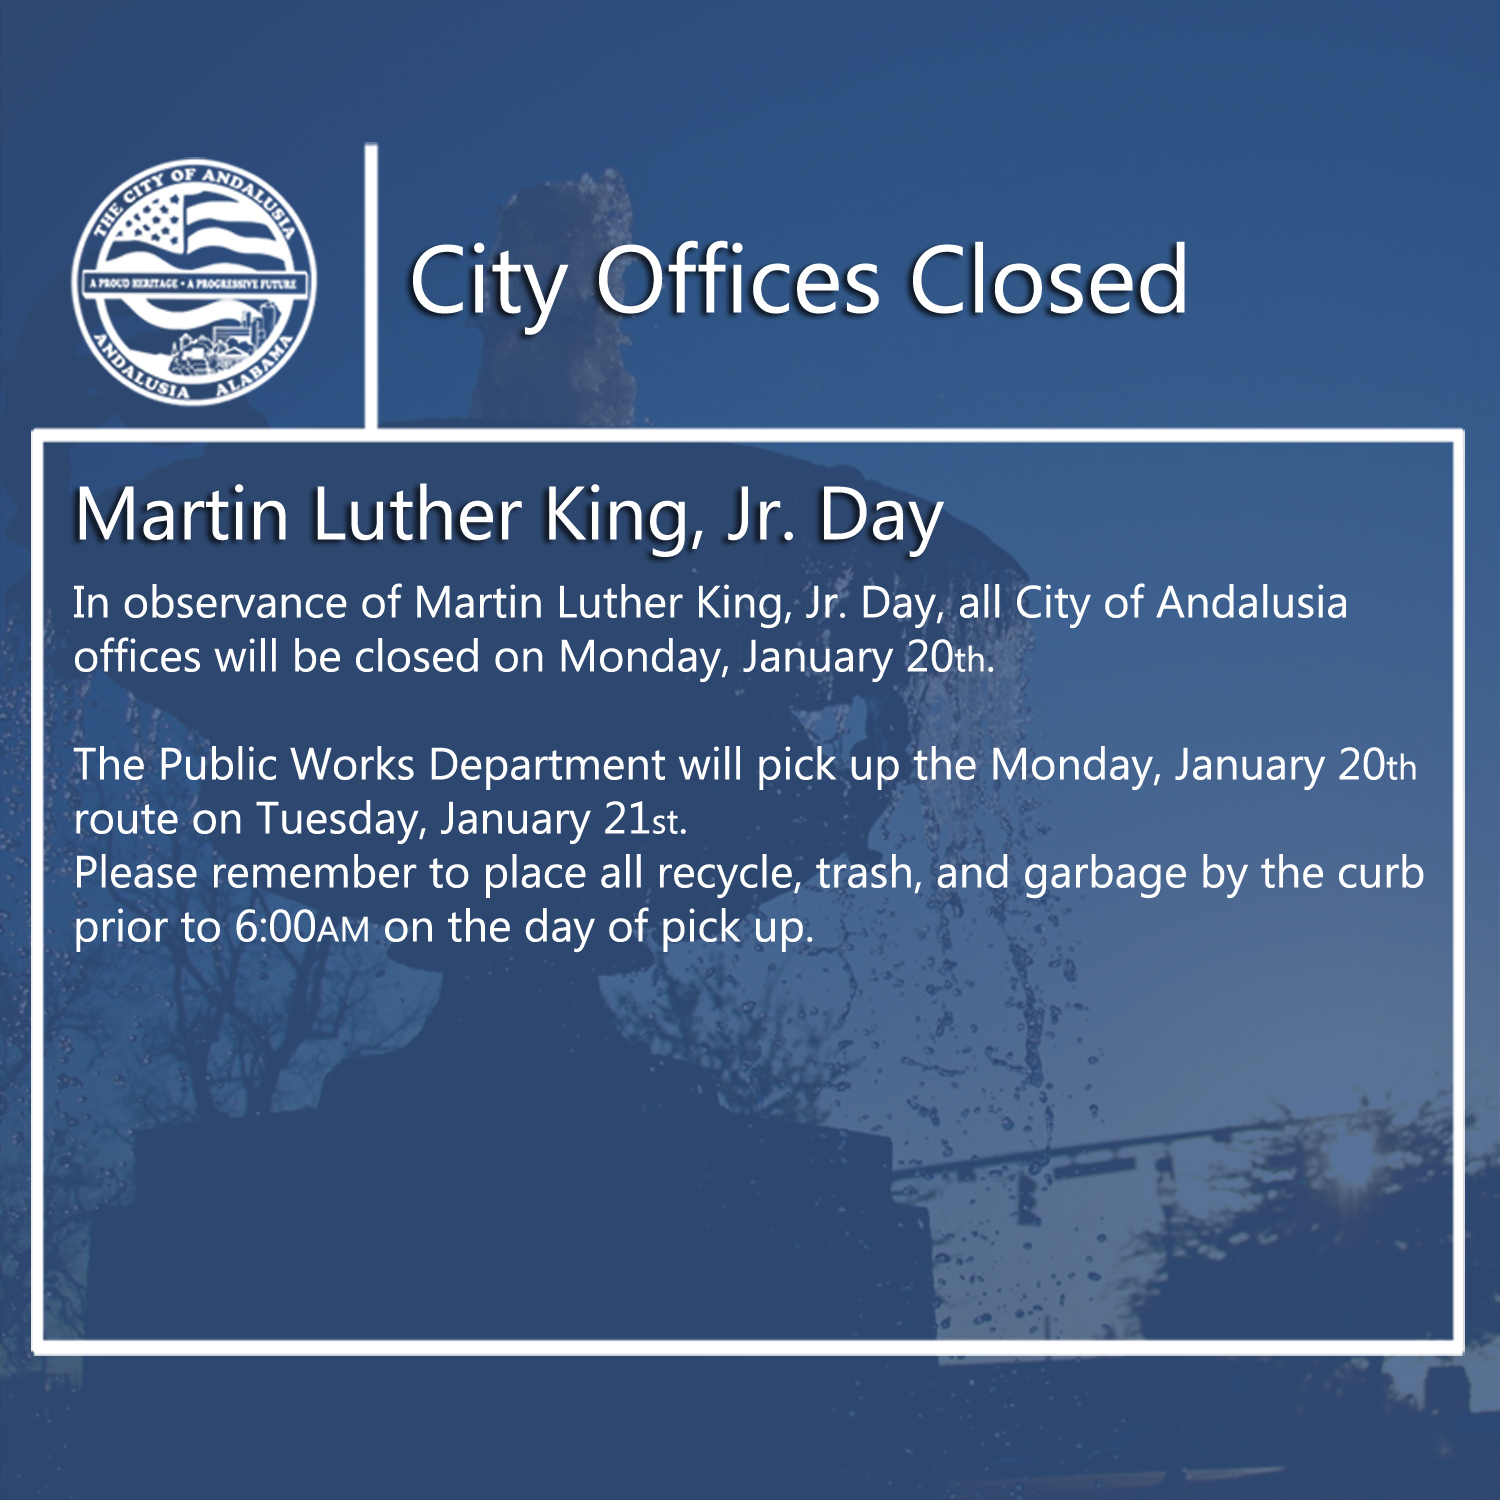 Facebook City Offices Closed Jan 20th